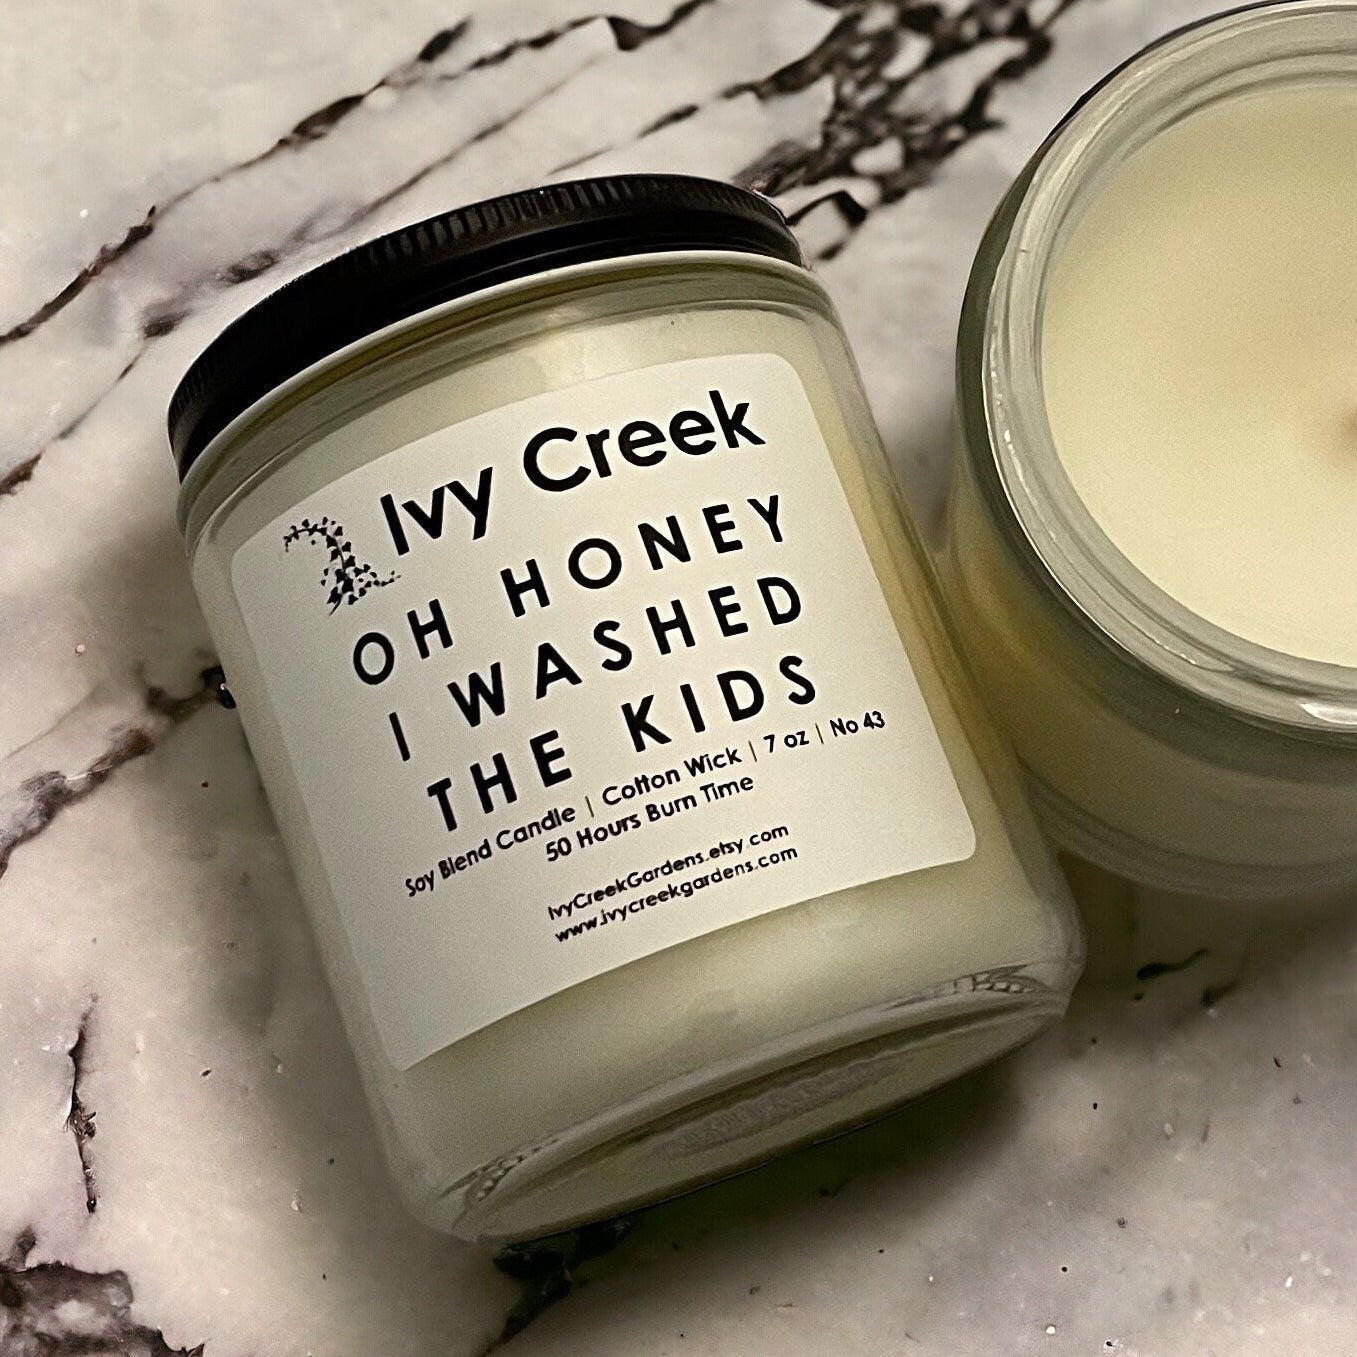 Ivy Creek No 43 Oh Honey I Washed the Kids - 7 oz , Hand Poured, Cotton Wick, Small Batch, Clean Burning, Container Candle